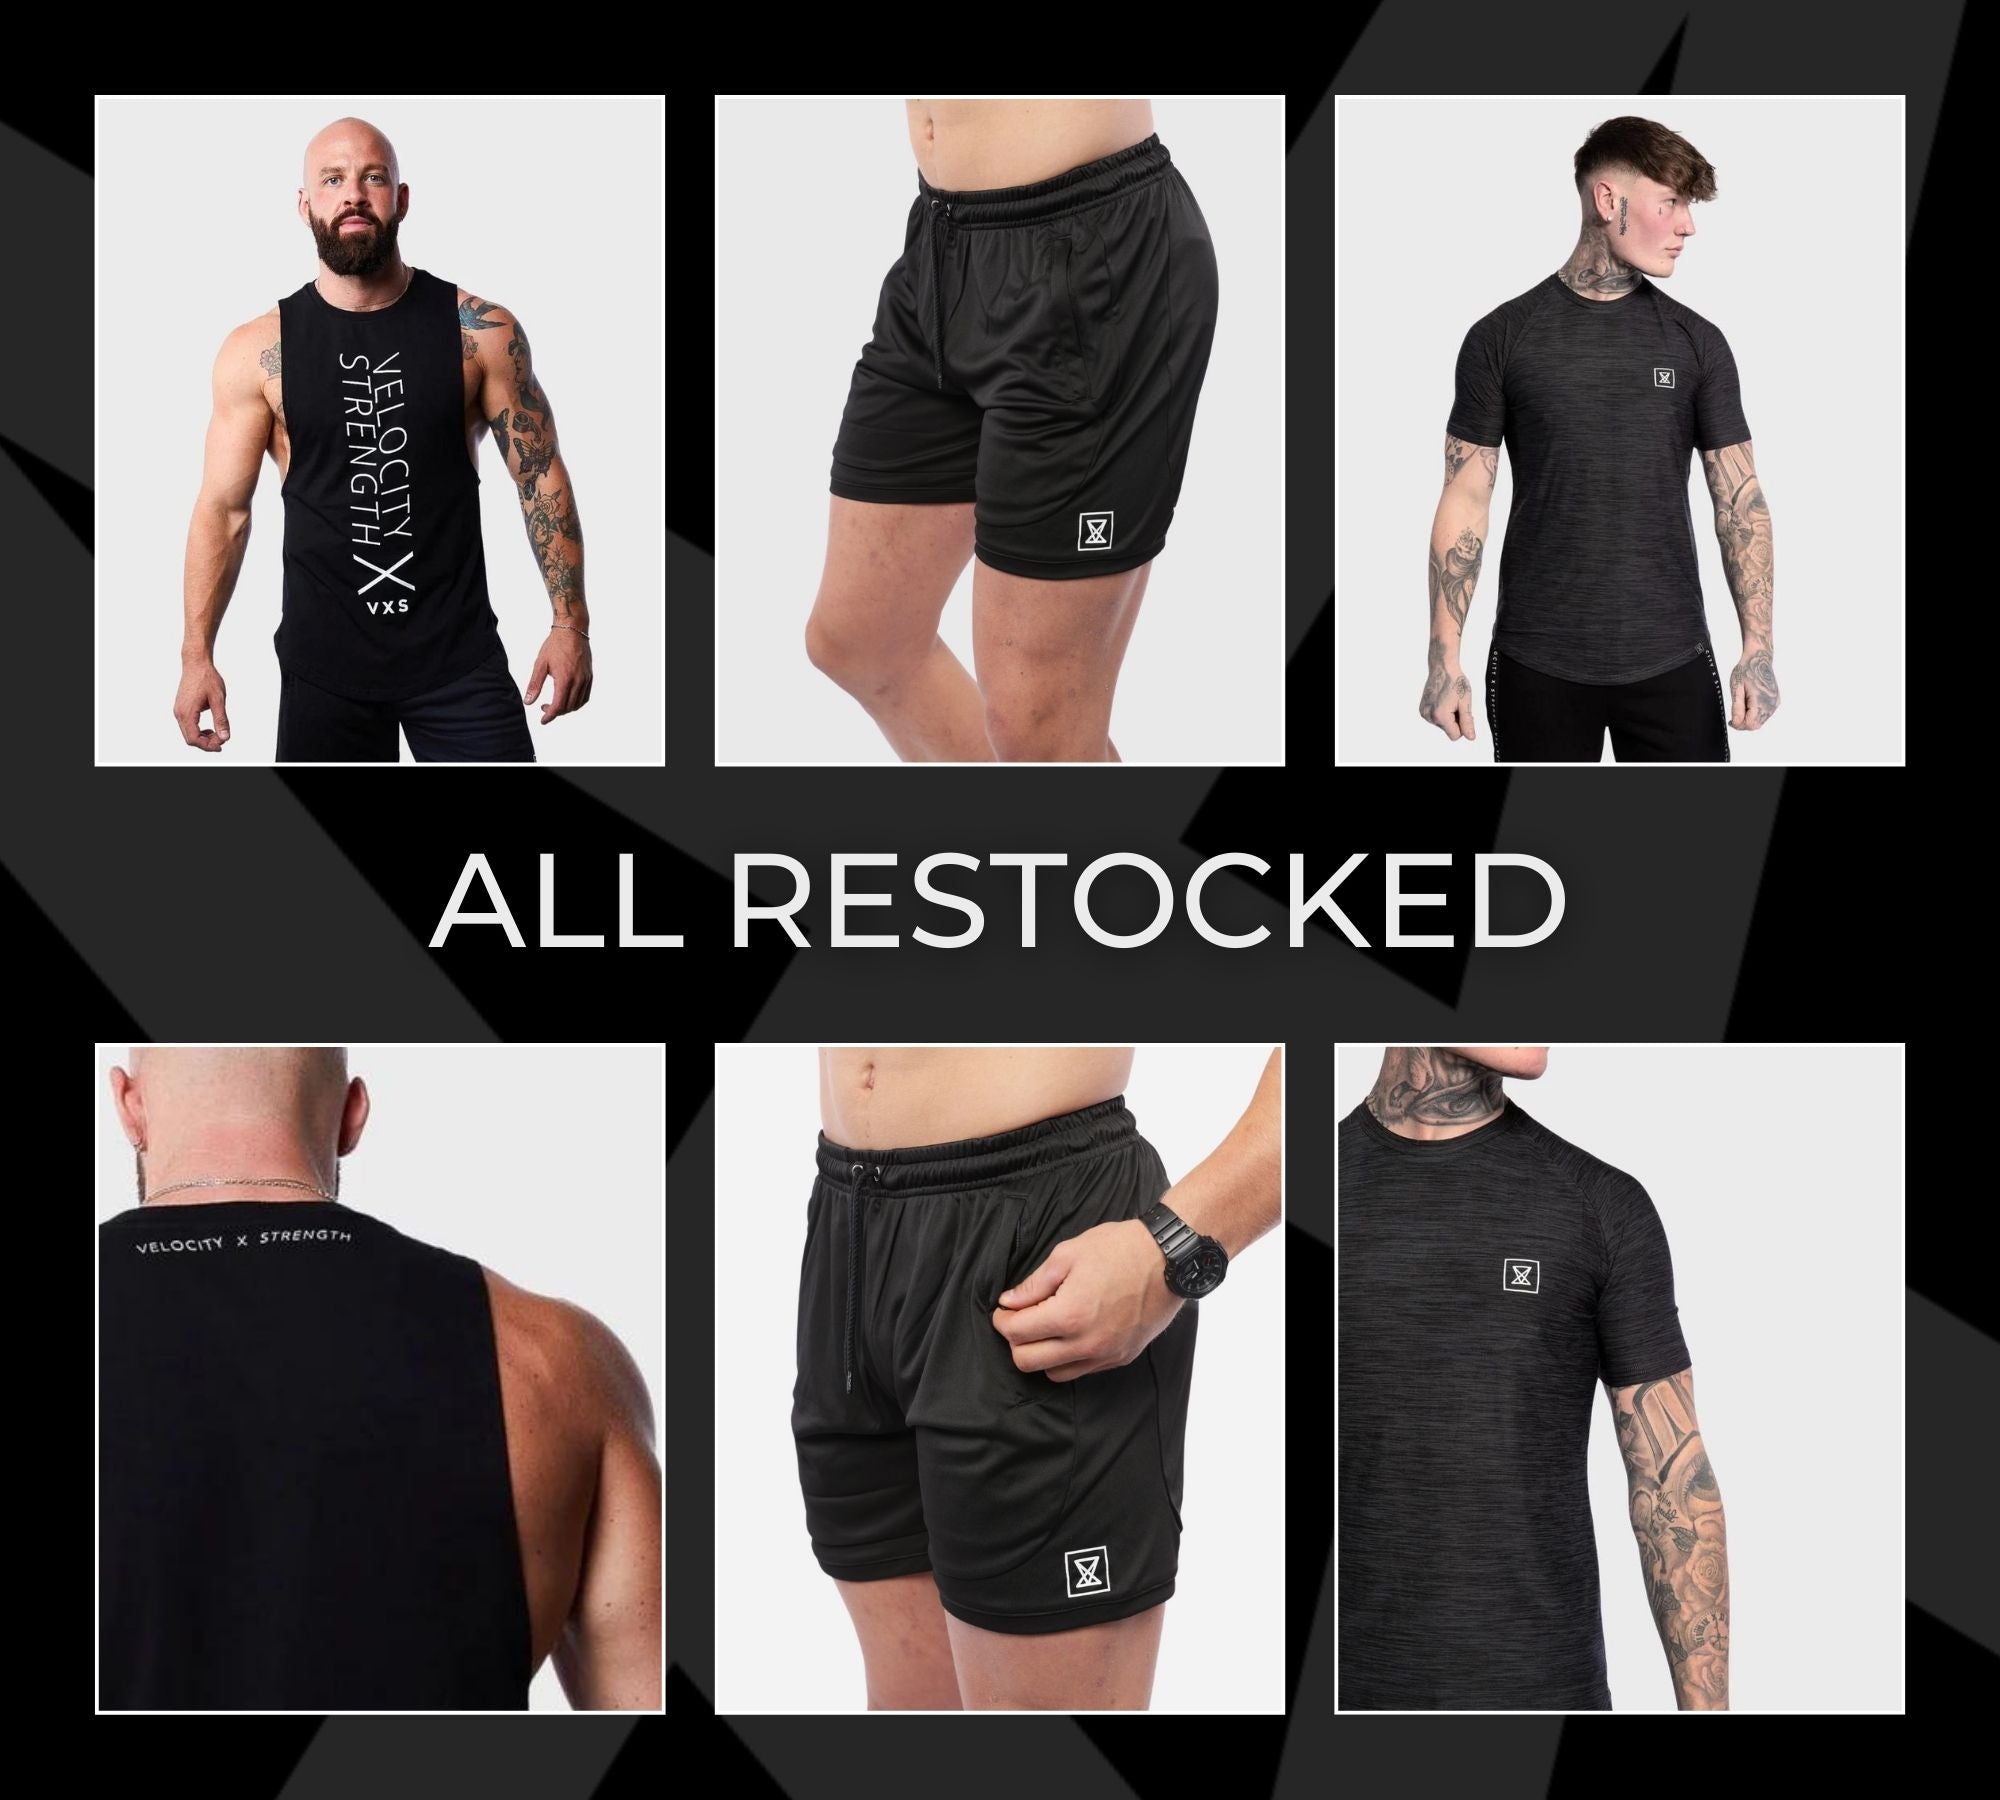 Back In Stock - What's back? - VXS GYM WEAR